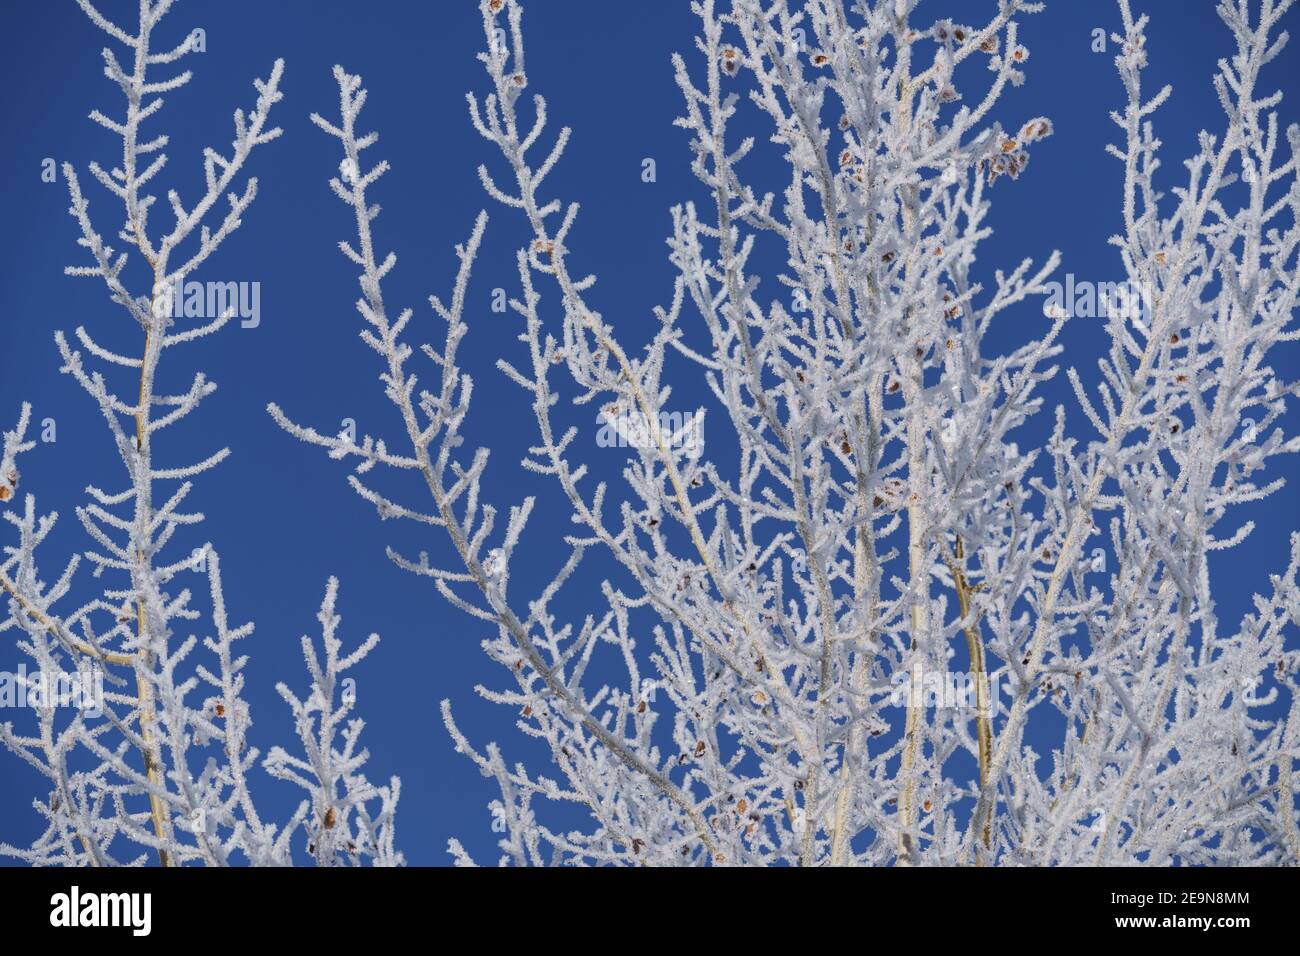 Frosty Aspen Tree Branches on Blue Sky in Winter Stock Photo